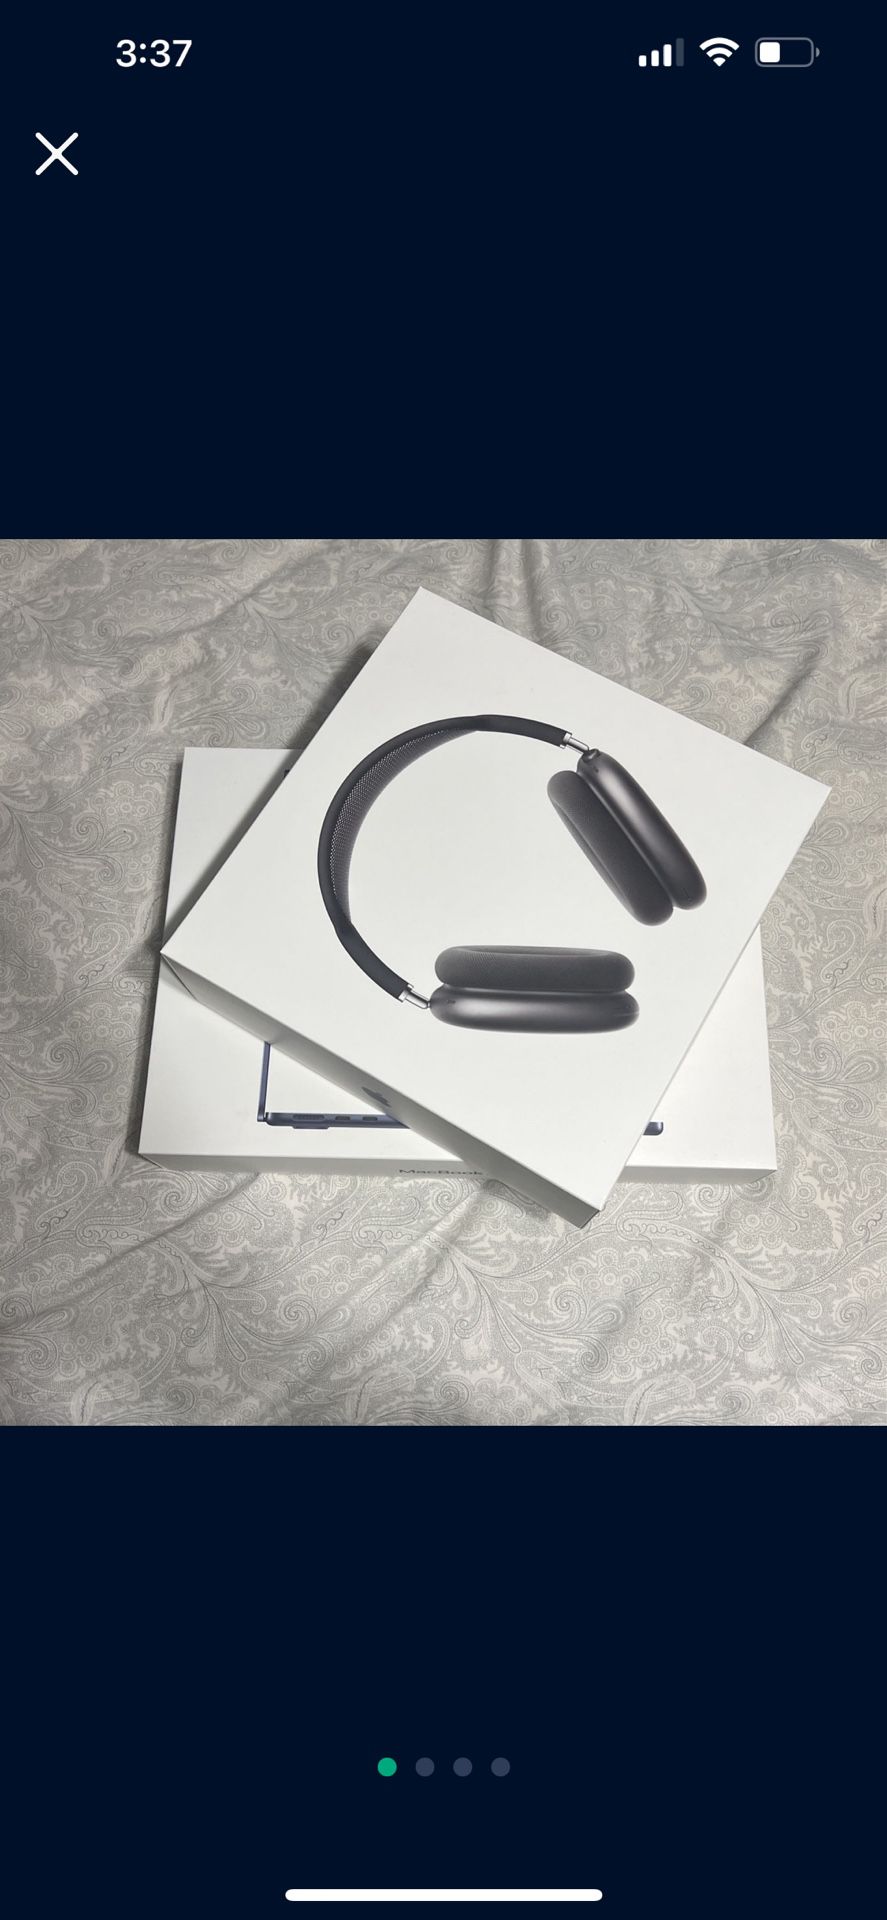 M2 Chip MacBook Air And AirPod Max Combo 